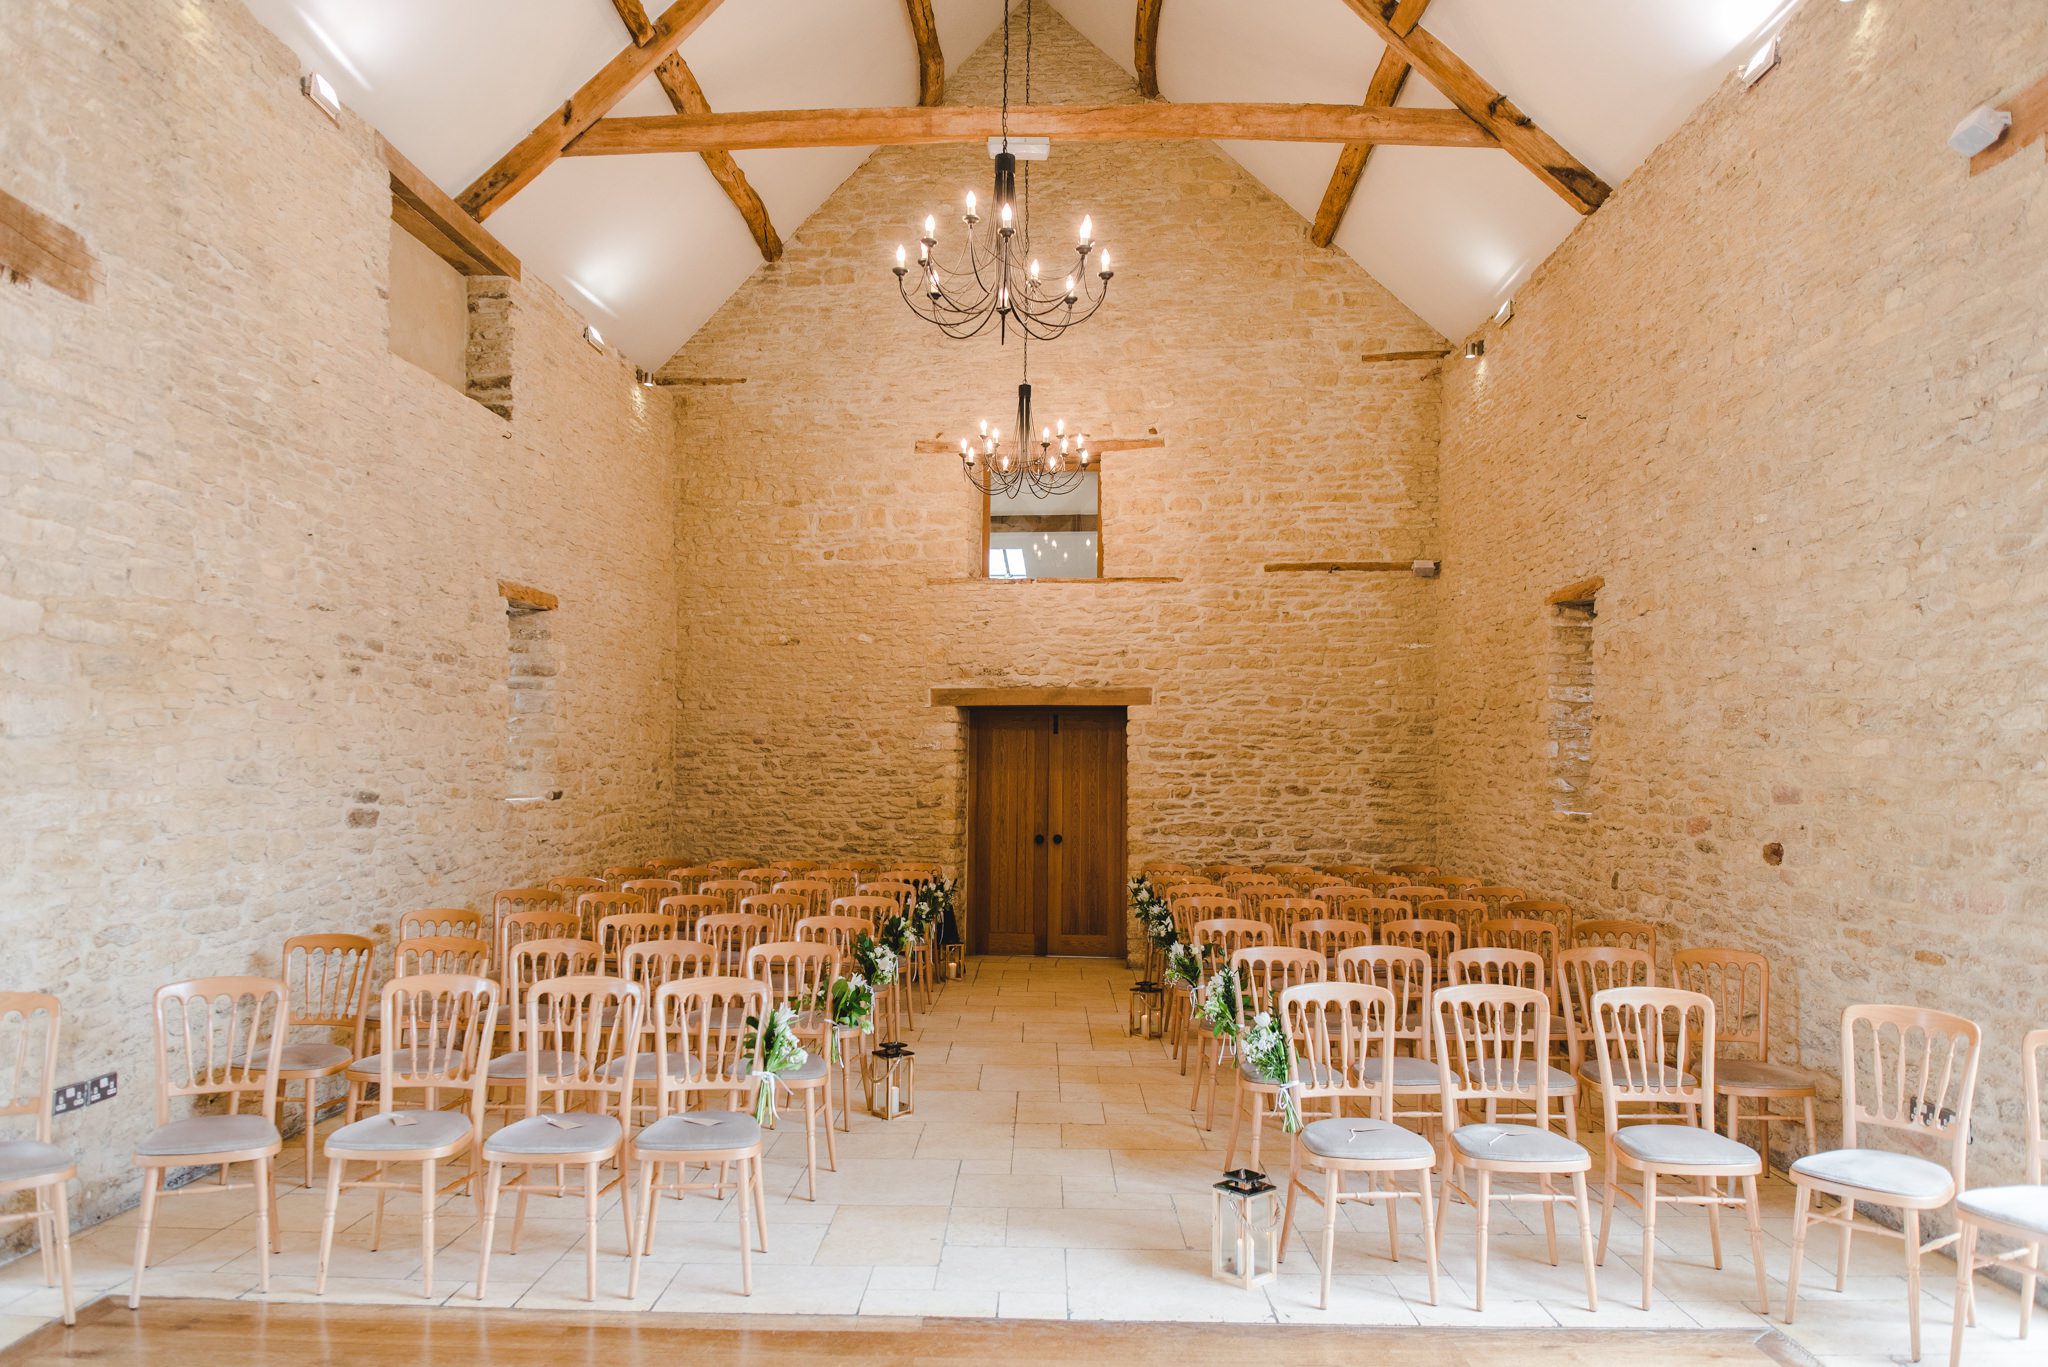 Kingscote barn set up for a ceremony